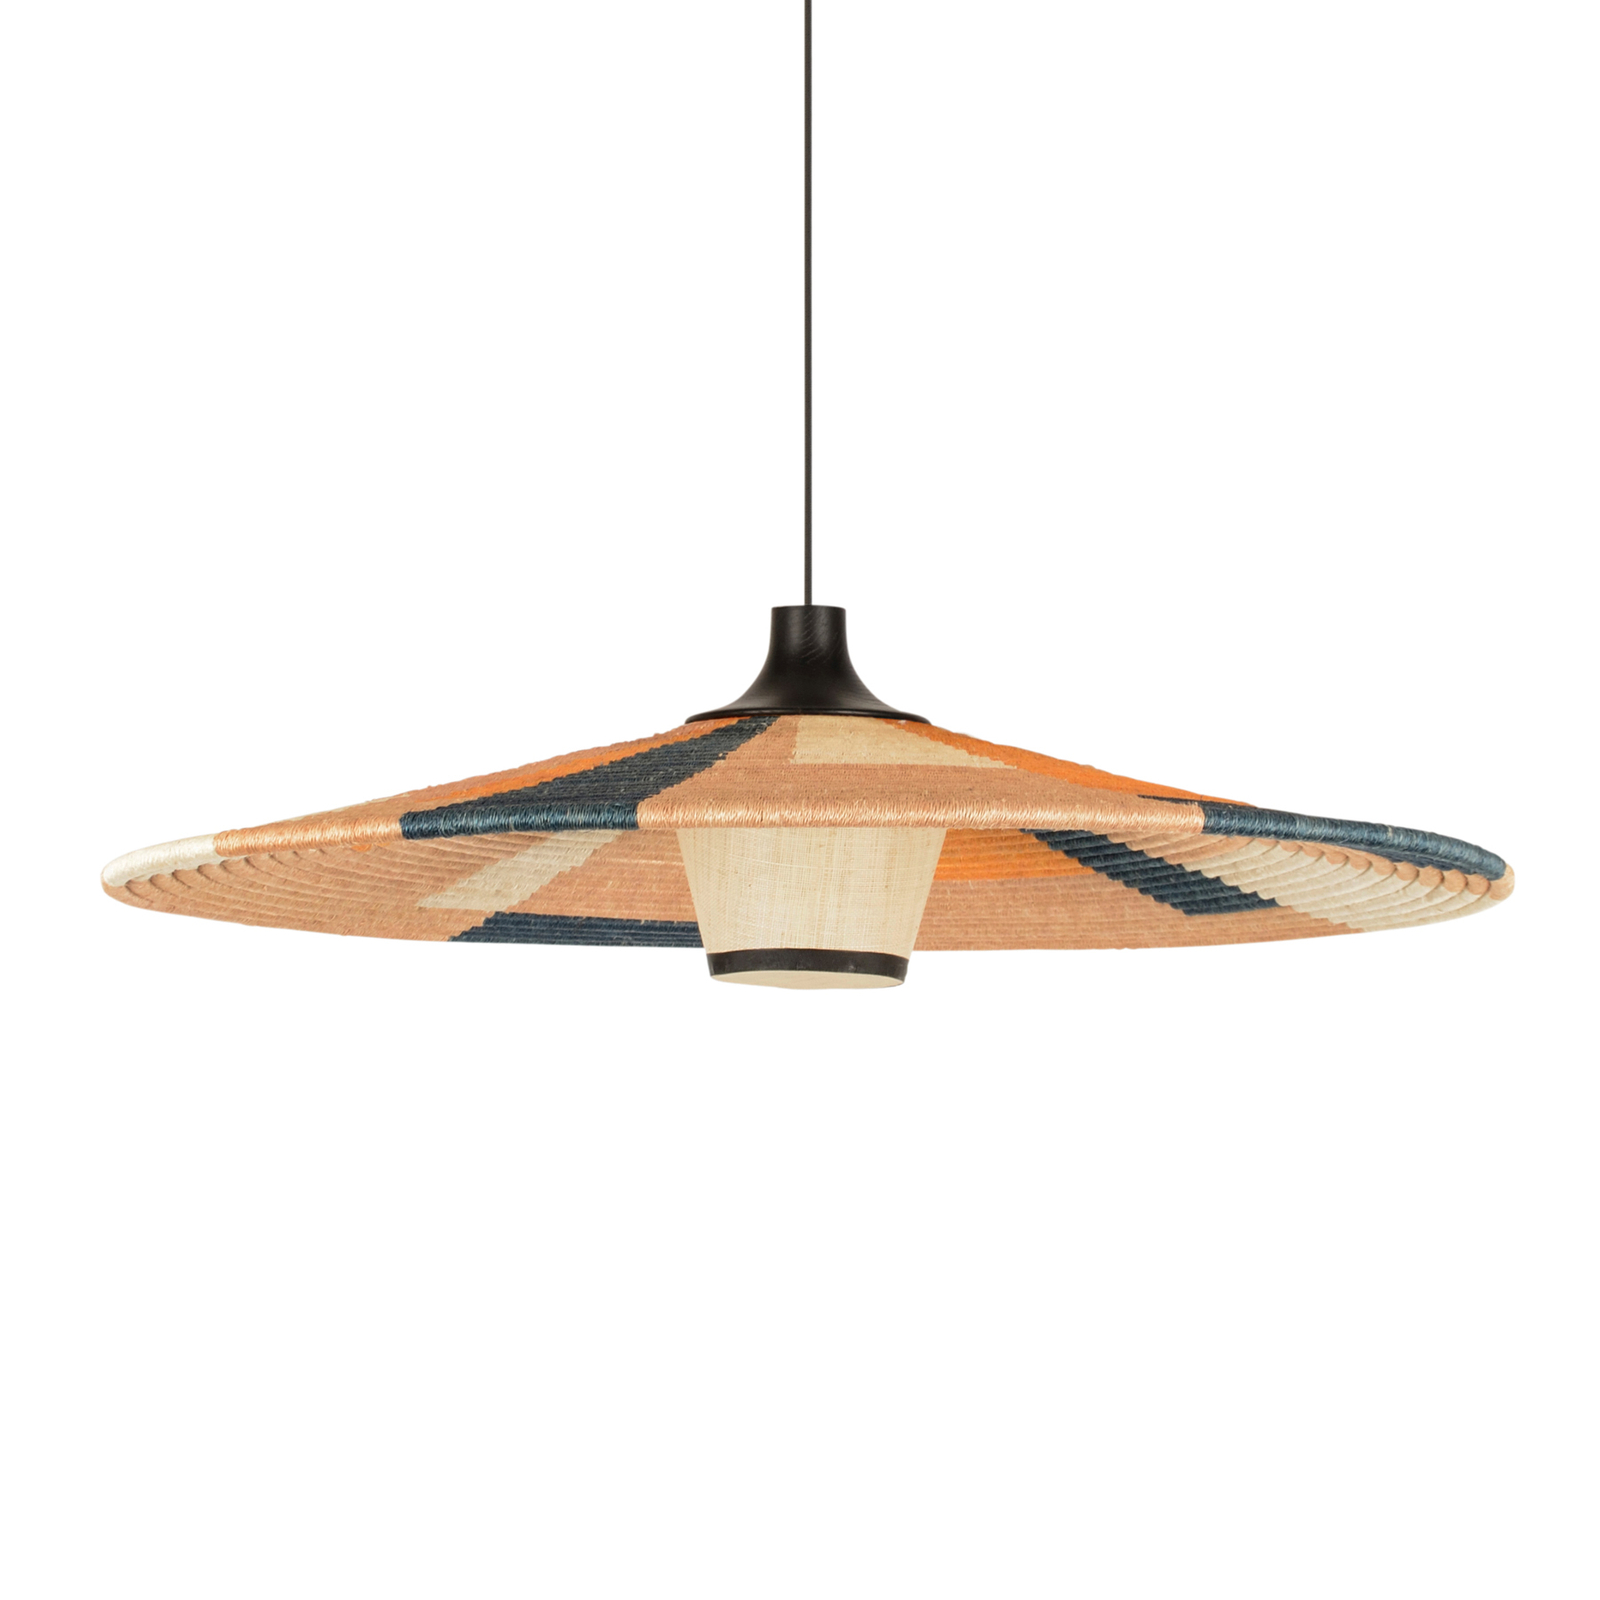 Forestier Parrot hanging light L, sand-coloured